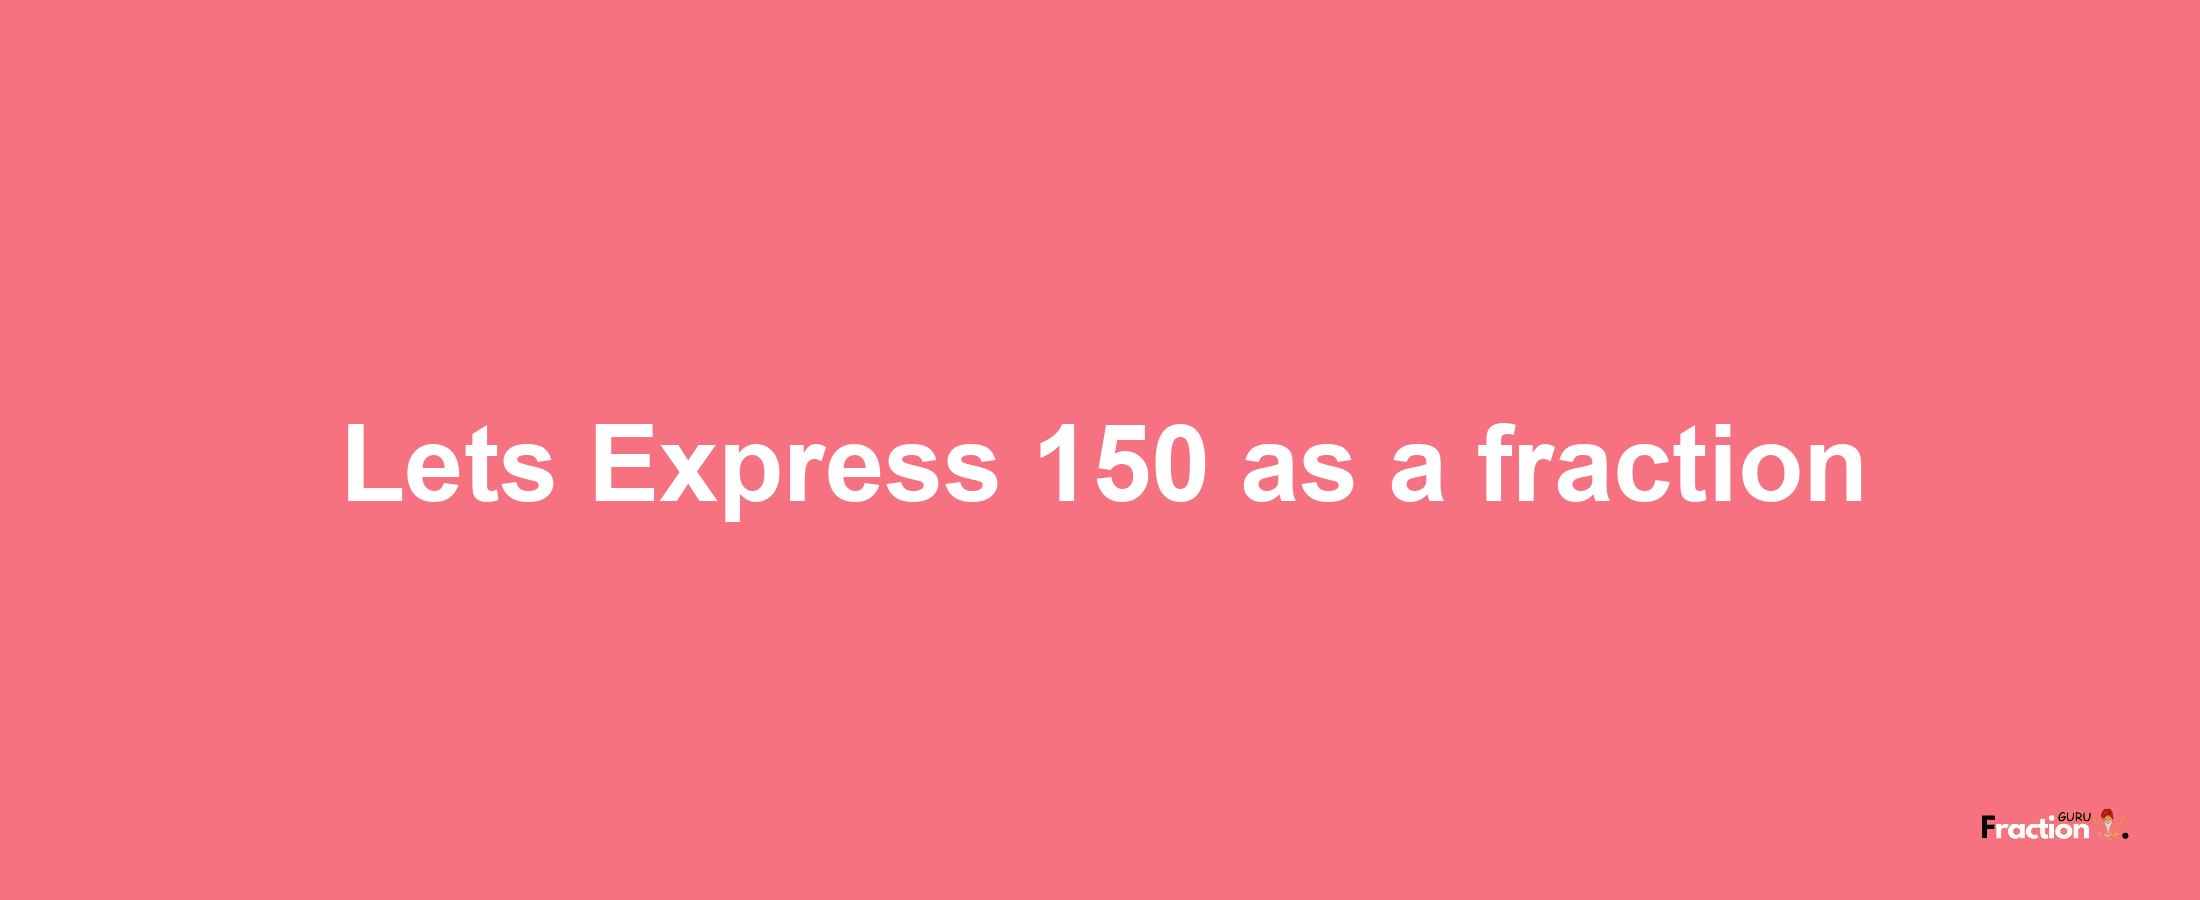 Lets Express 150 as afraction